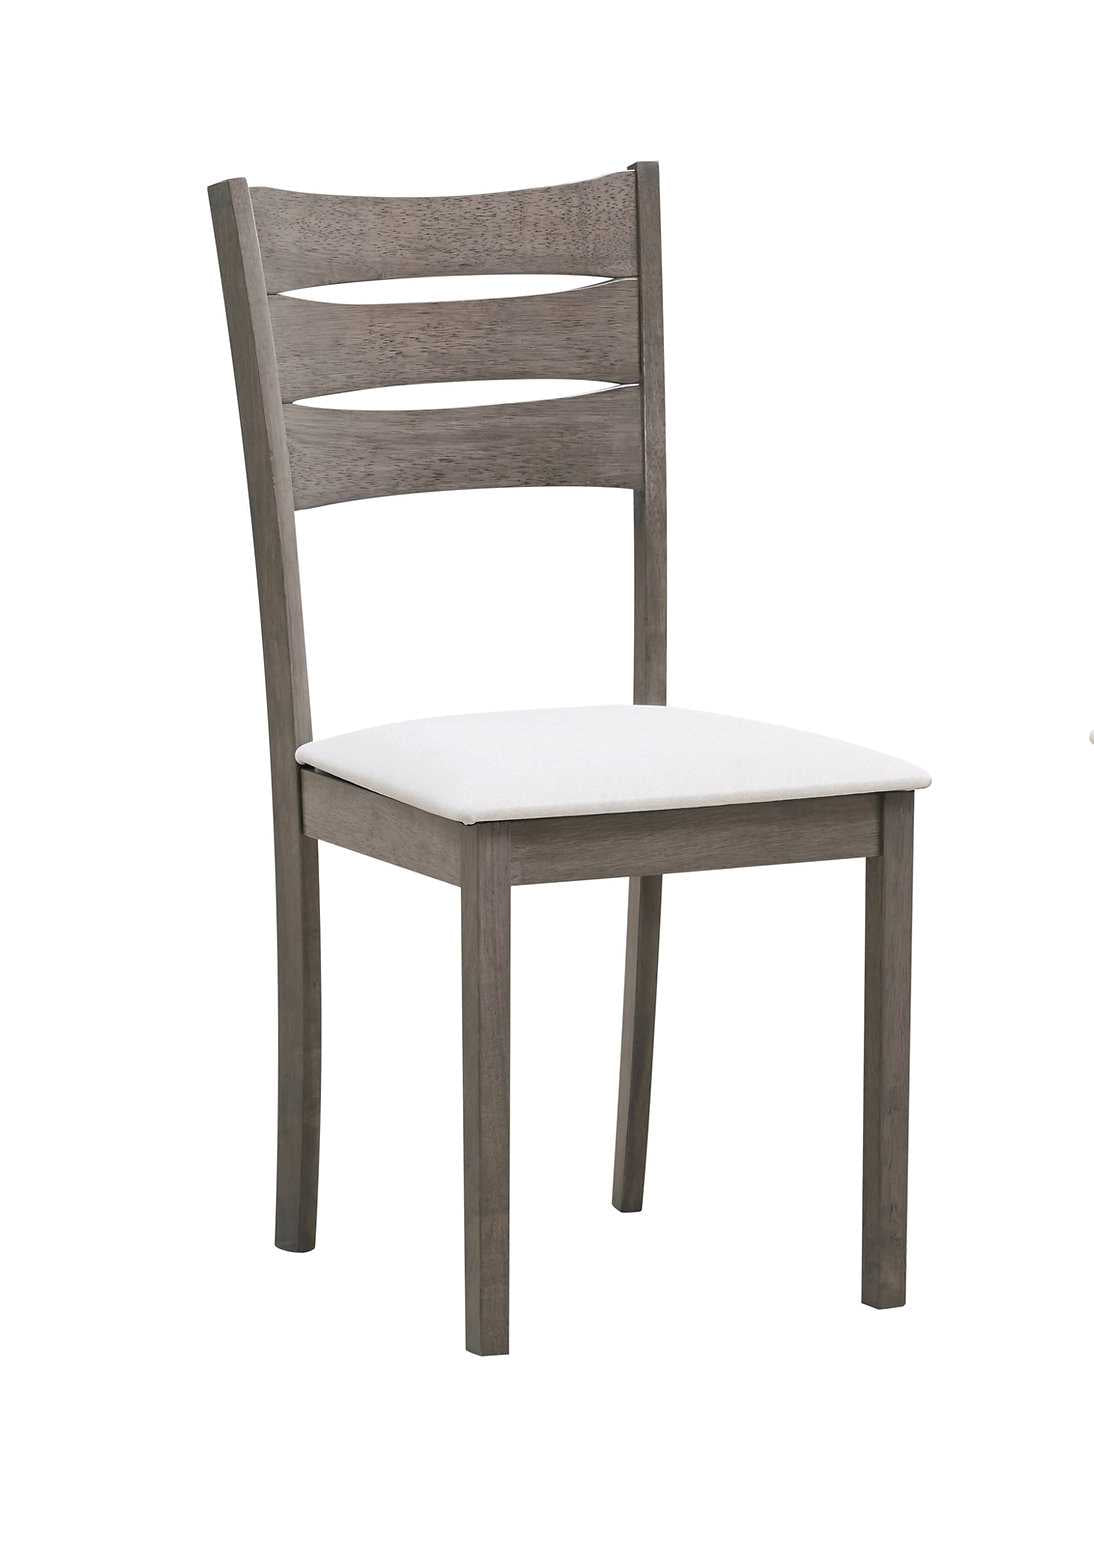 2 Piece Antique Grey Dining Chair in Cream Fabric Seats 1052